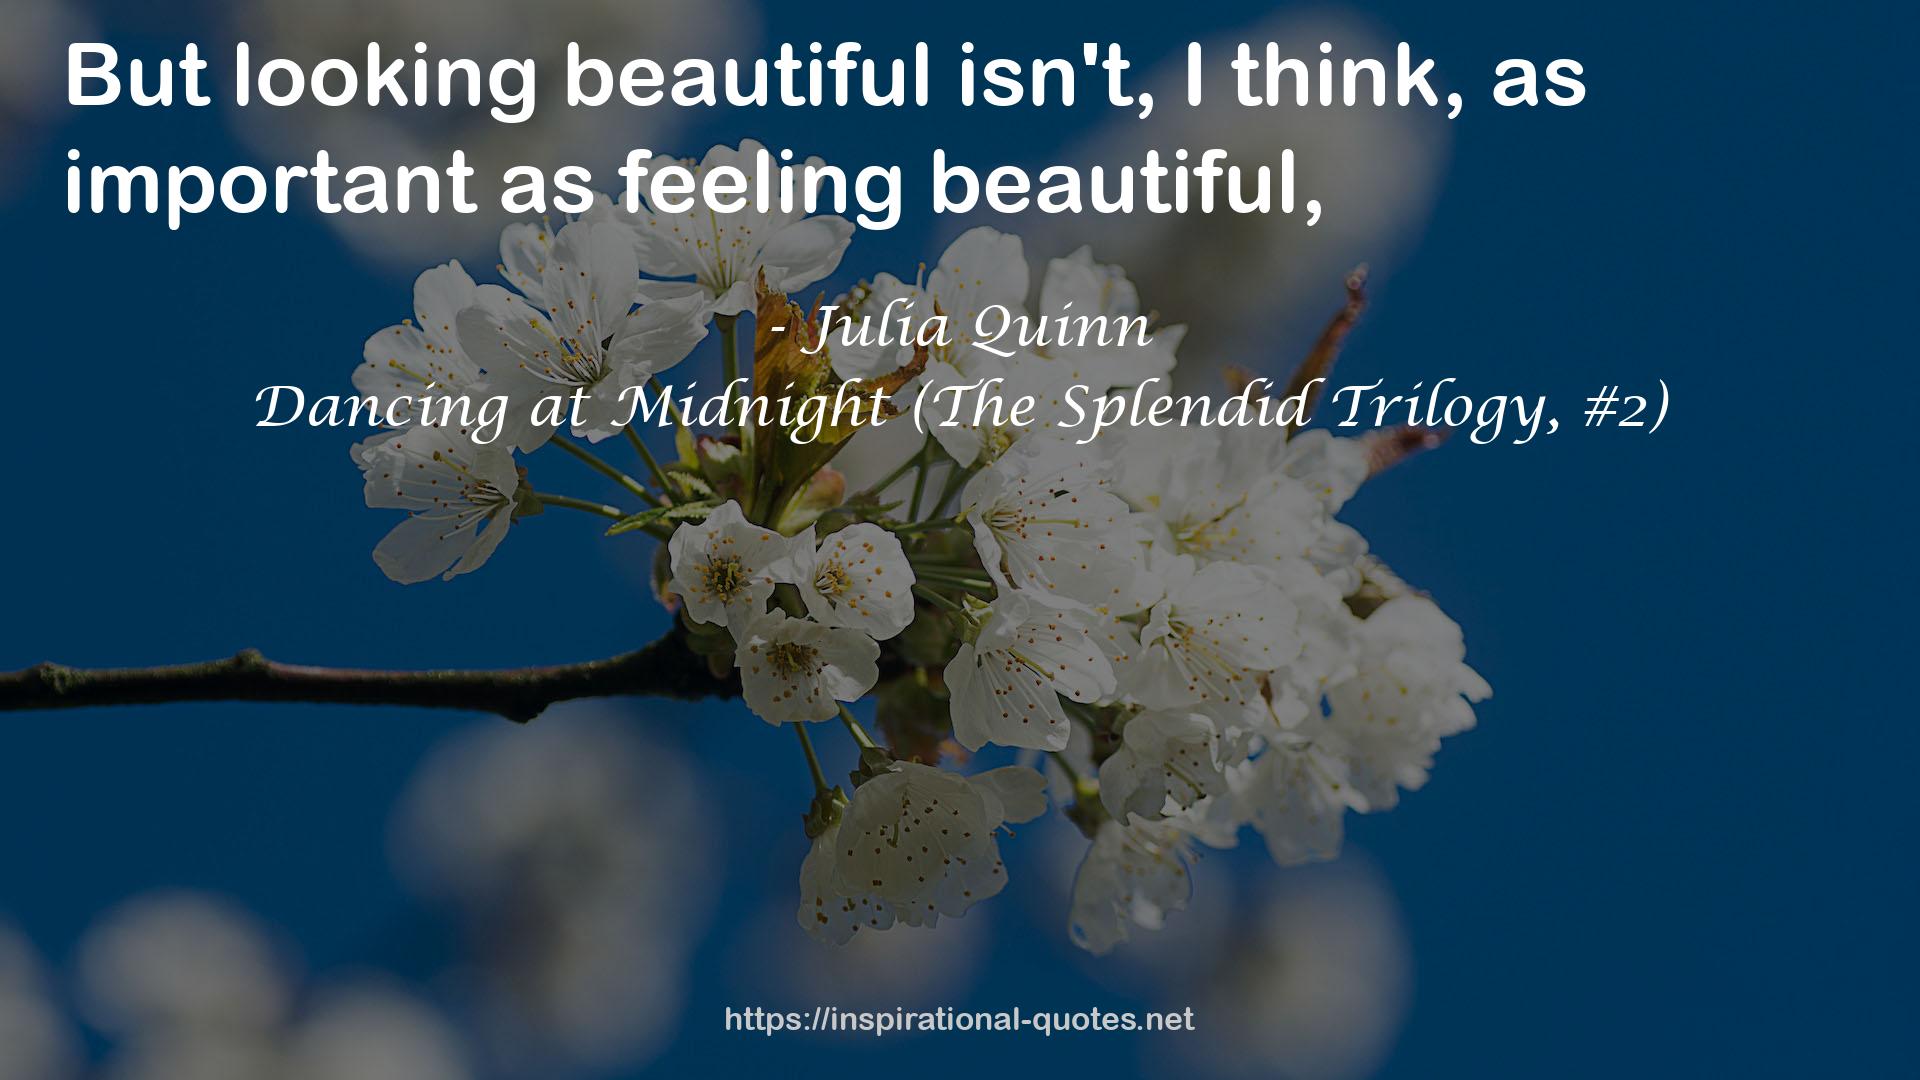 Dancing at Midnight (The Splendid Trilogy, #2) QUOTES